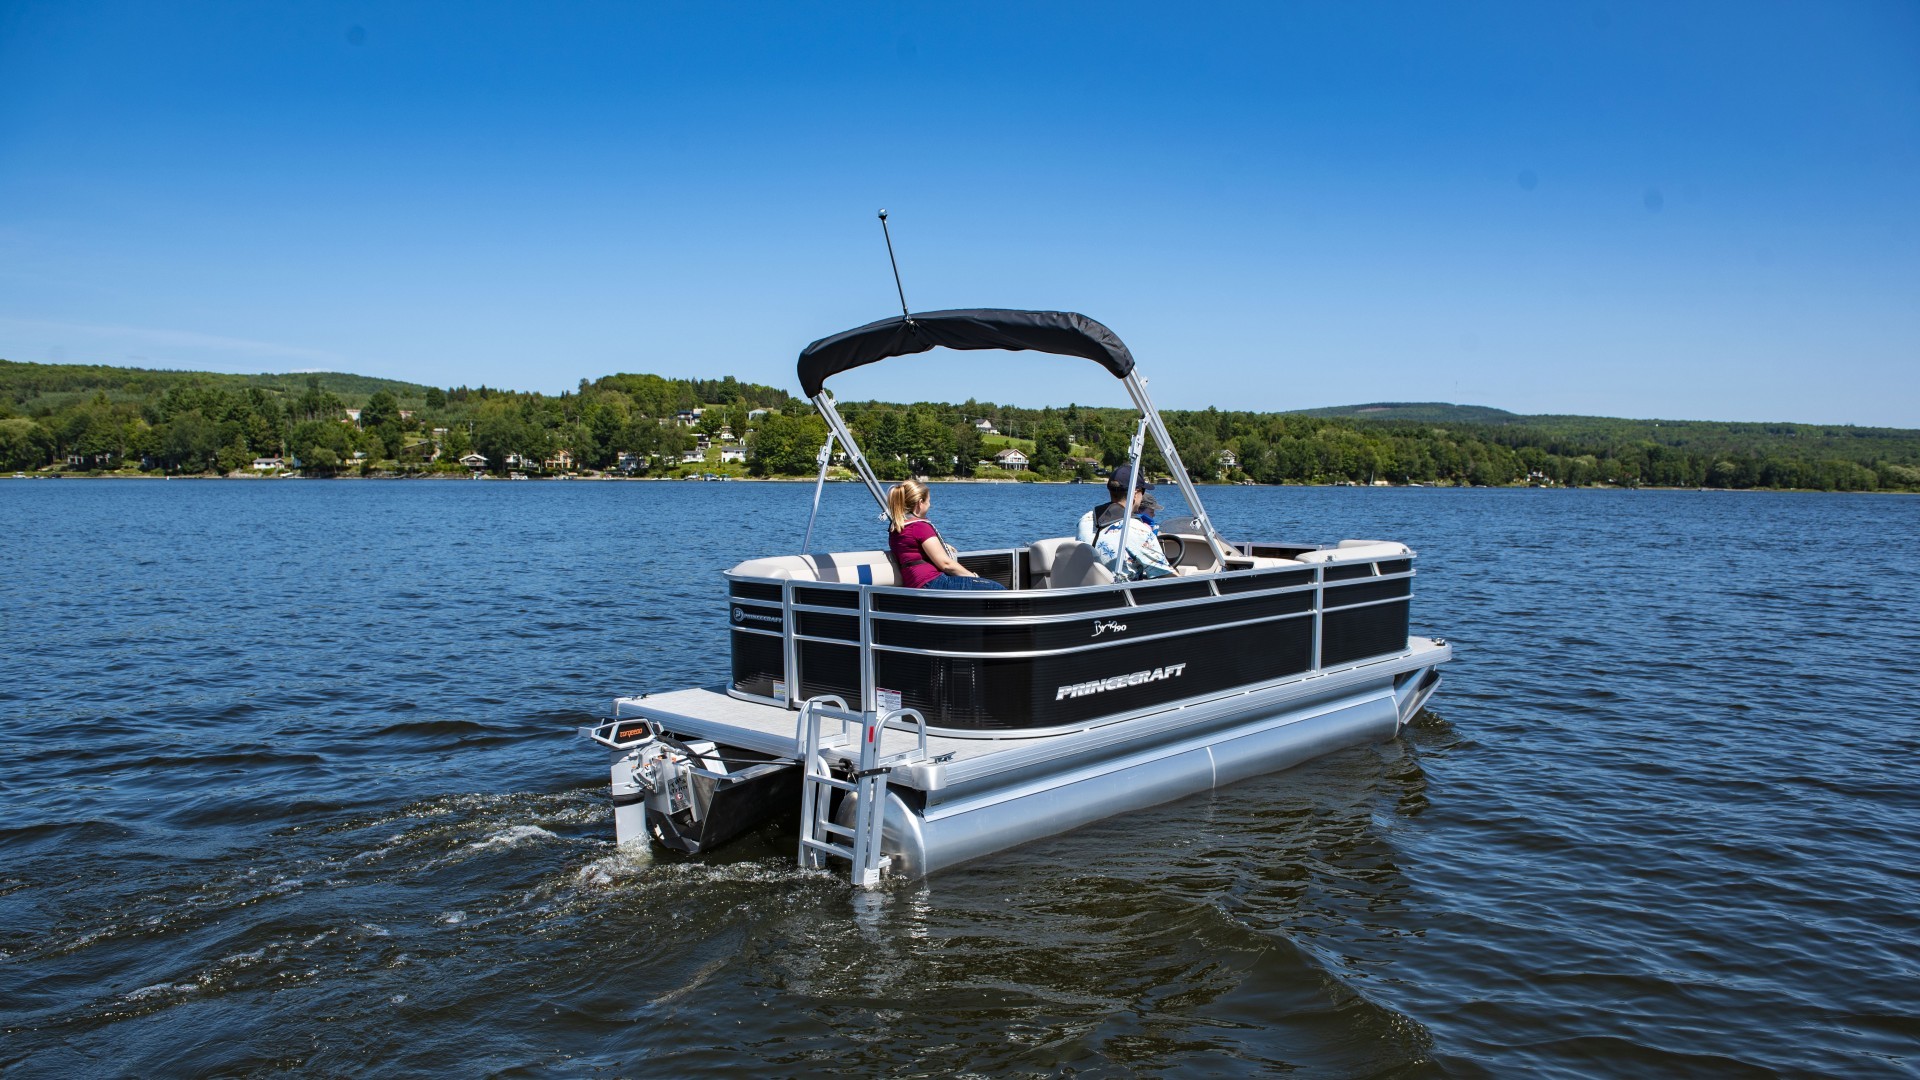 Cruise motors are perfect for Pontoon Boats and other applications